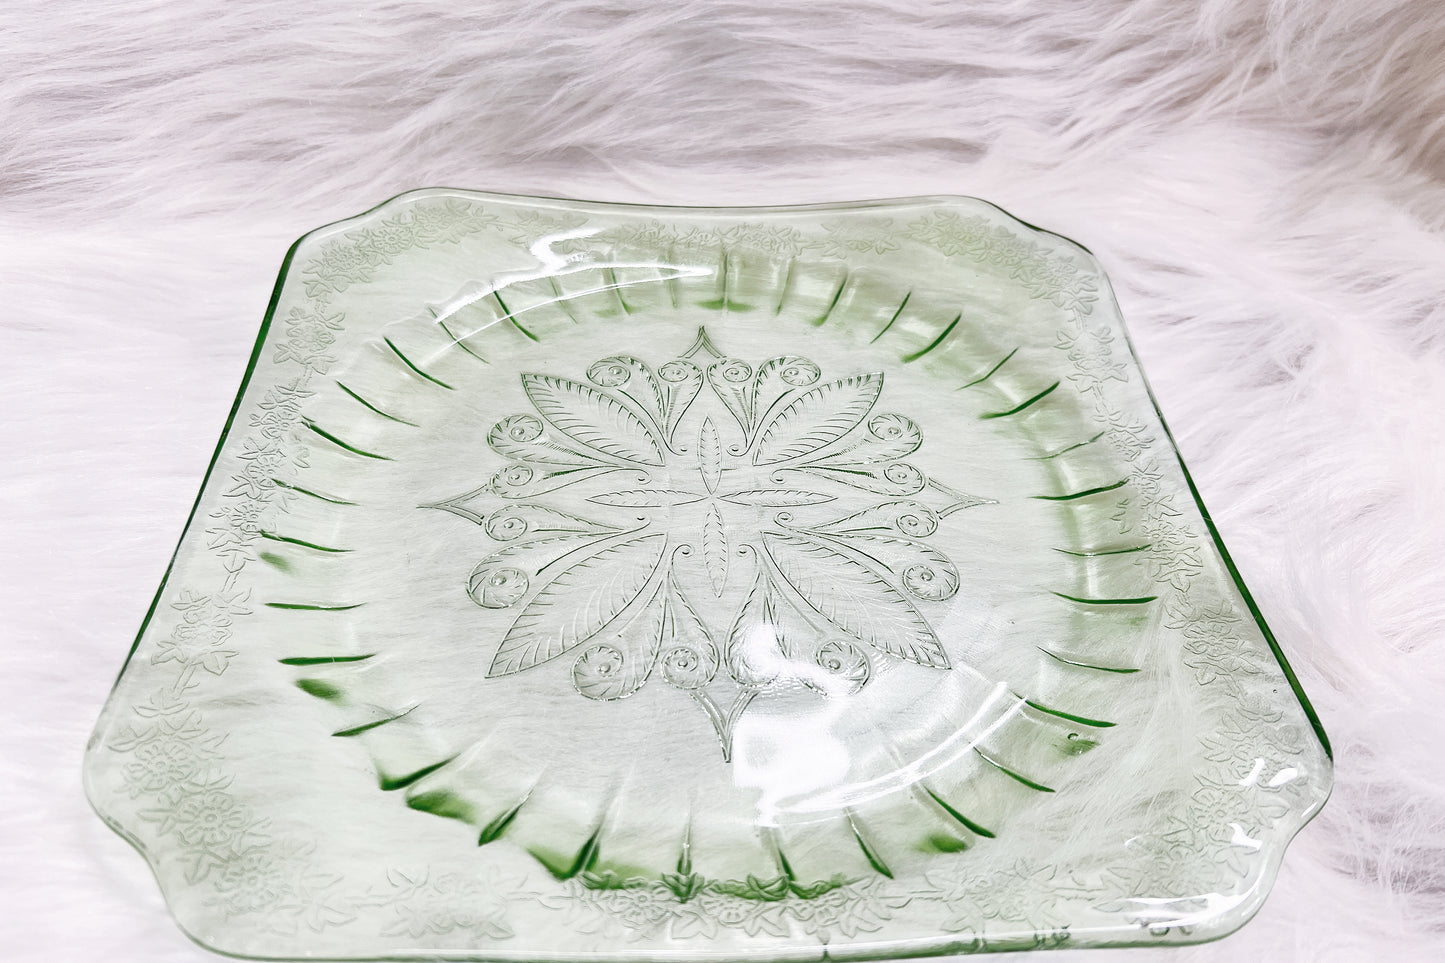 Vintage Green Carnival Glass Plate Set of 4 [with Exclusive NFT]